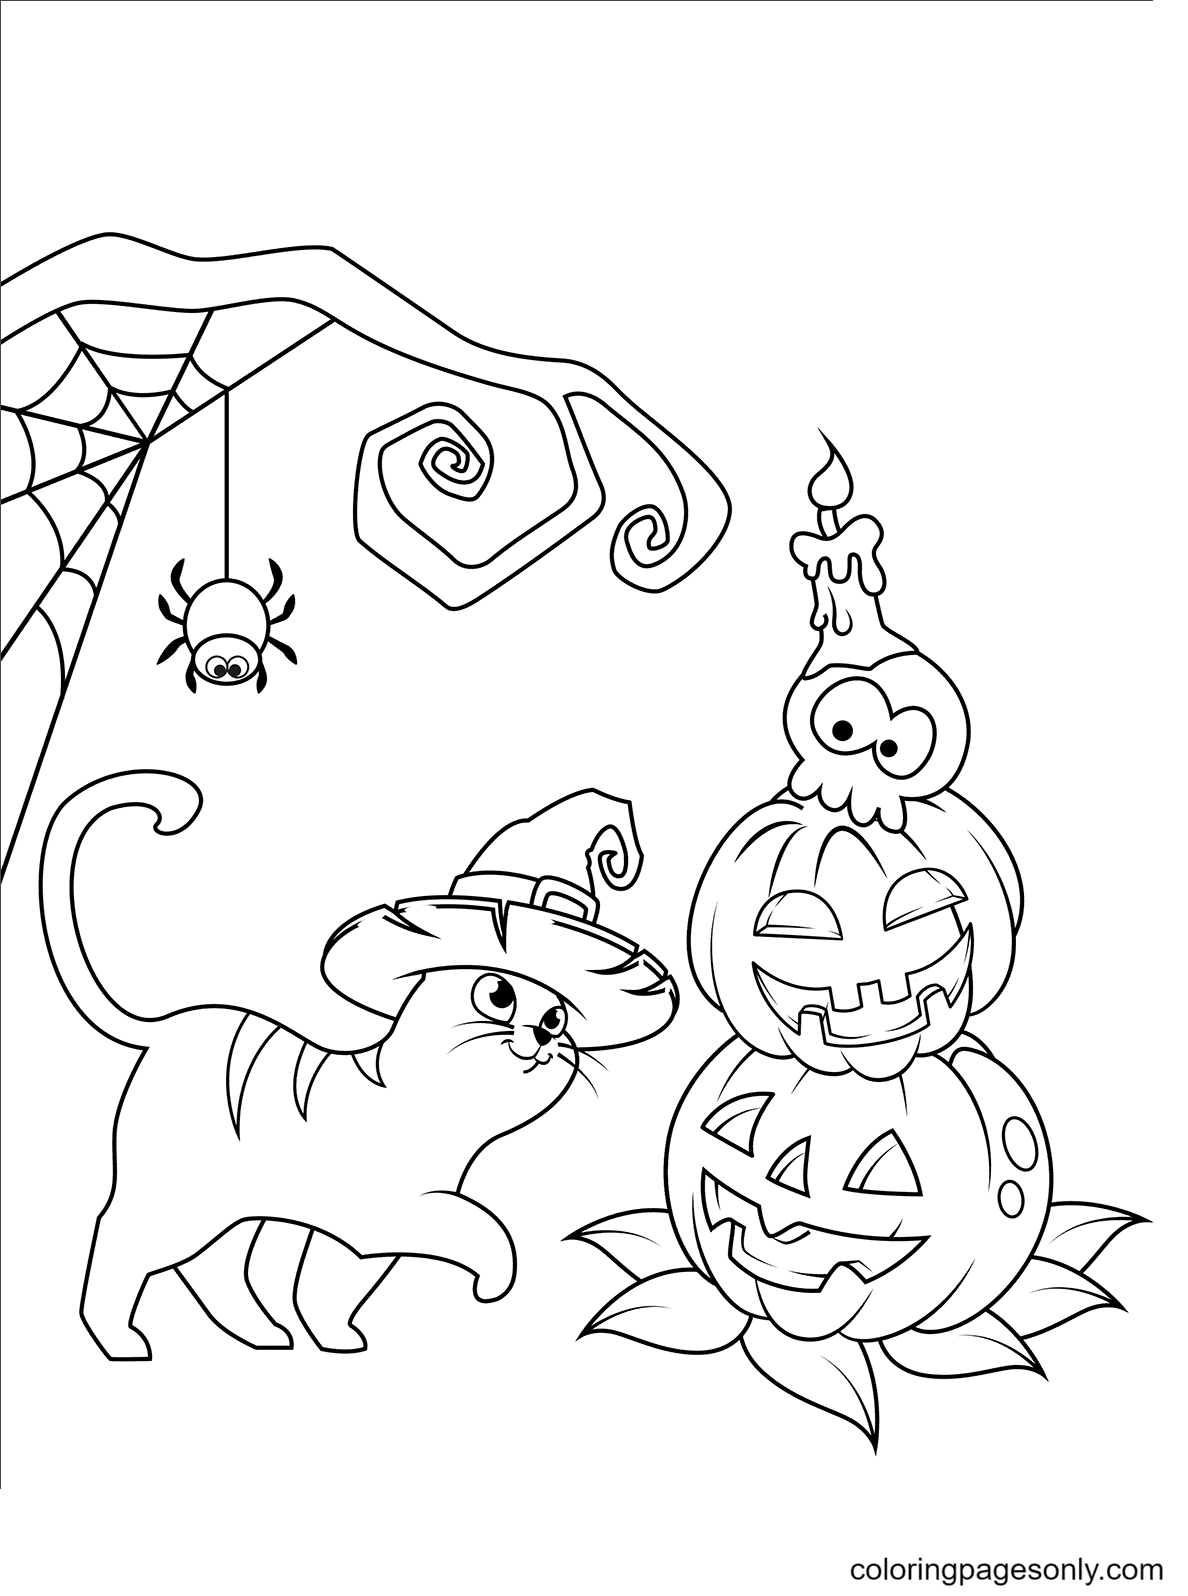 Halloween Cat and Jack O’Lantern Coloring Page